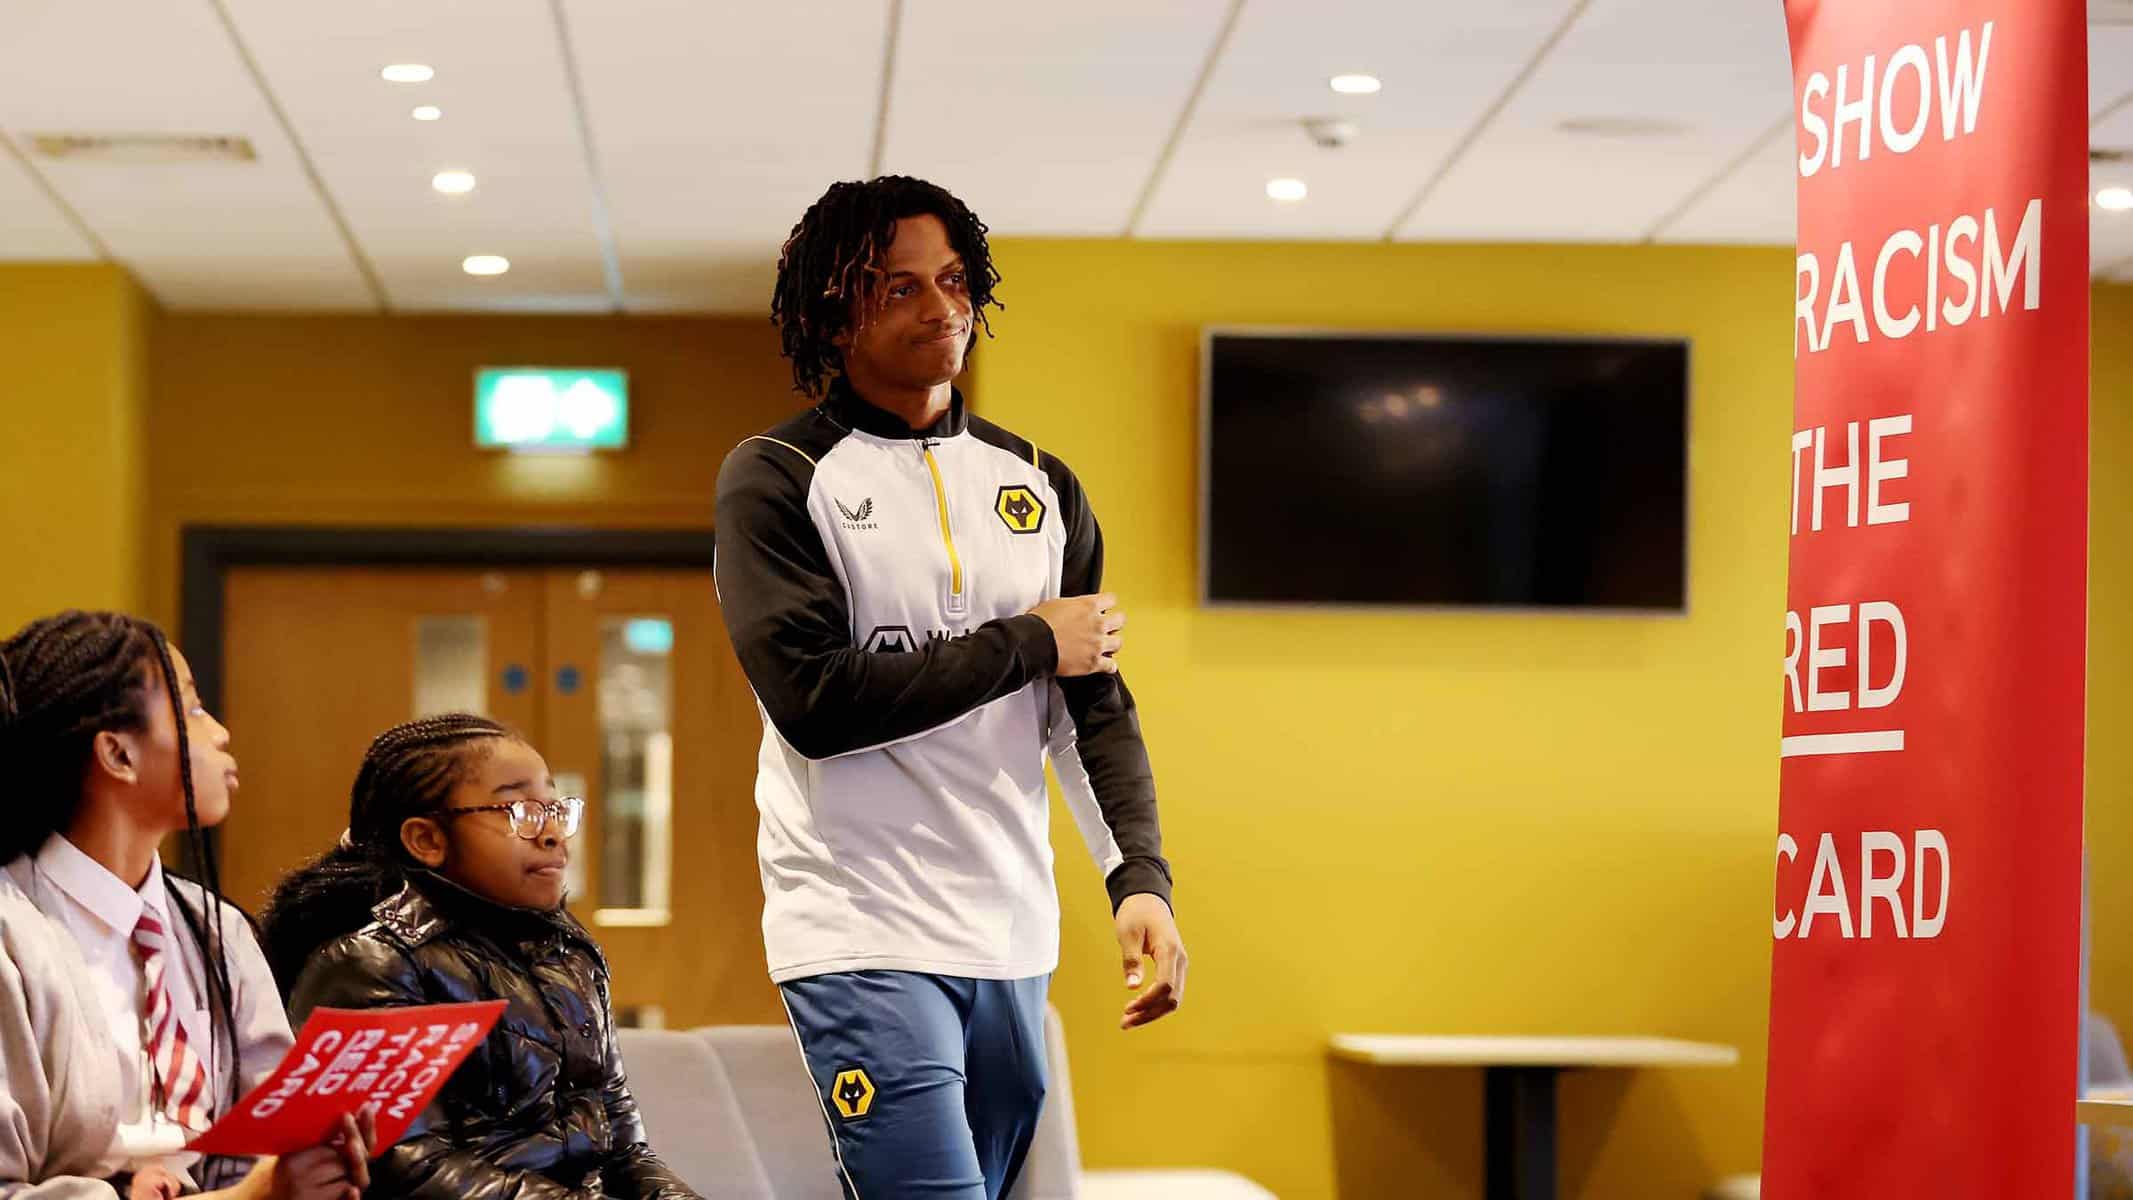 Foundation Show Racism the Red Card at Molineux Image